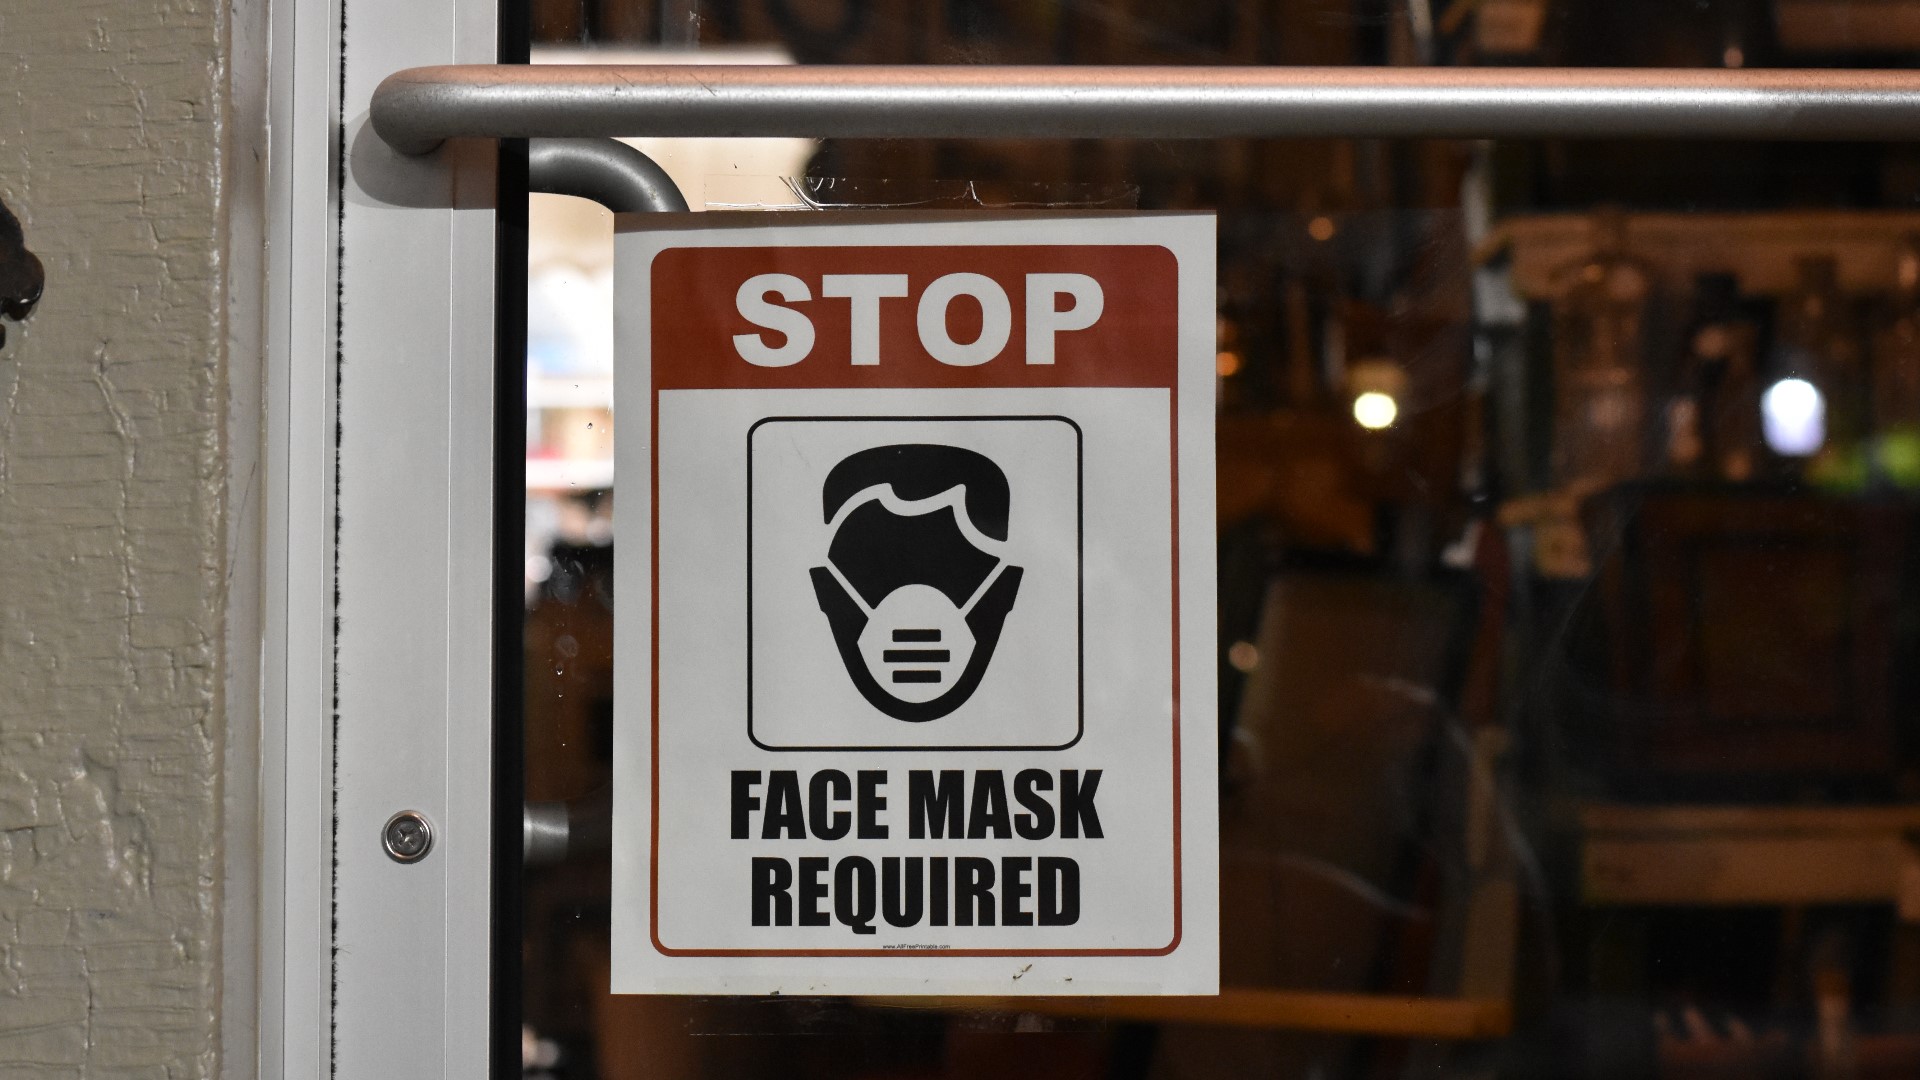 The simplified restrictions continue requirements for wearing masks and social distancing in public but will ease rules for large outdoor gatherings.